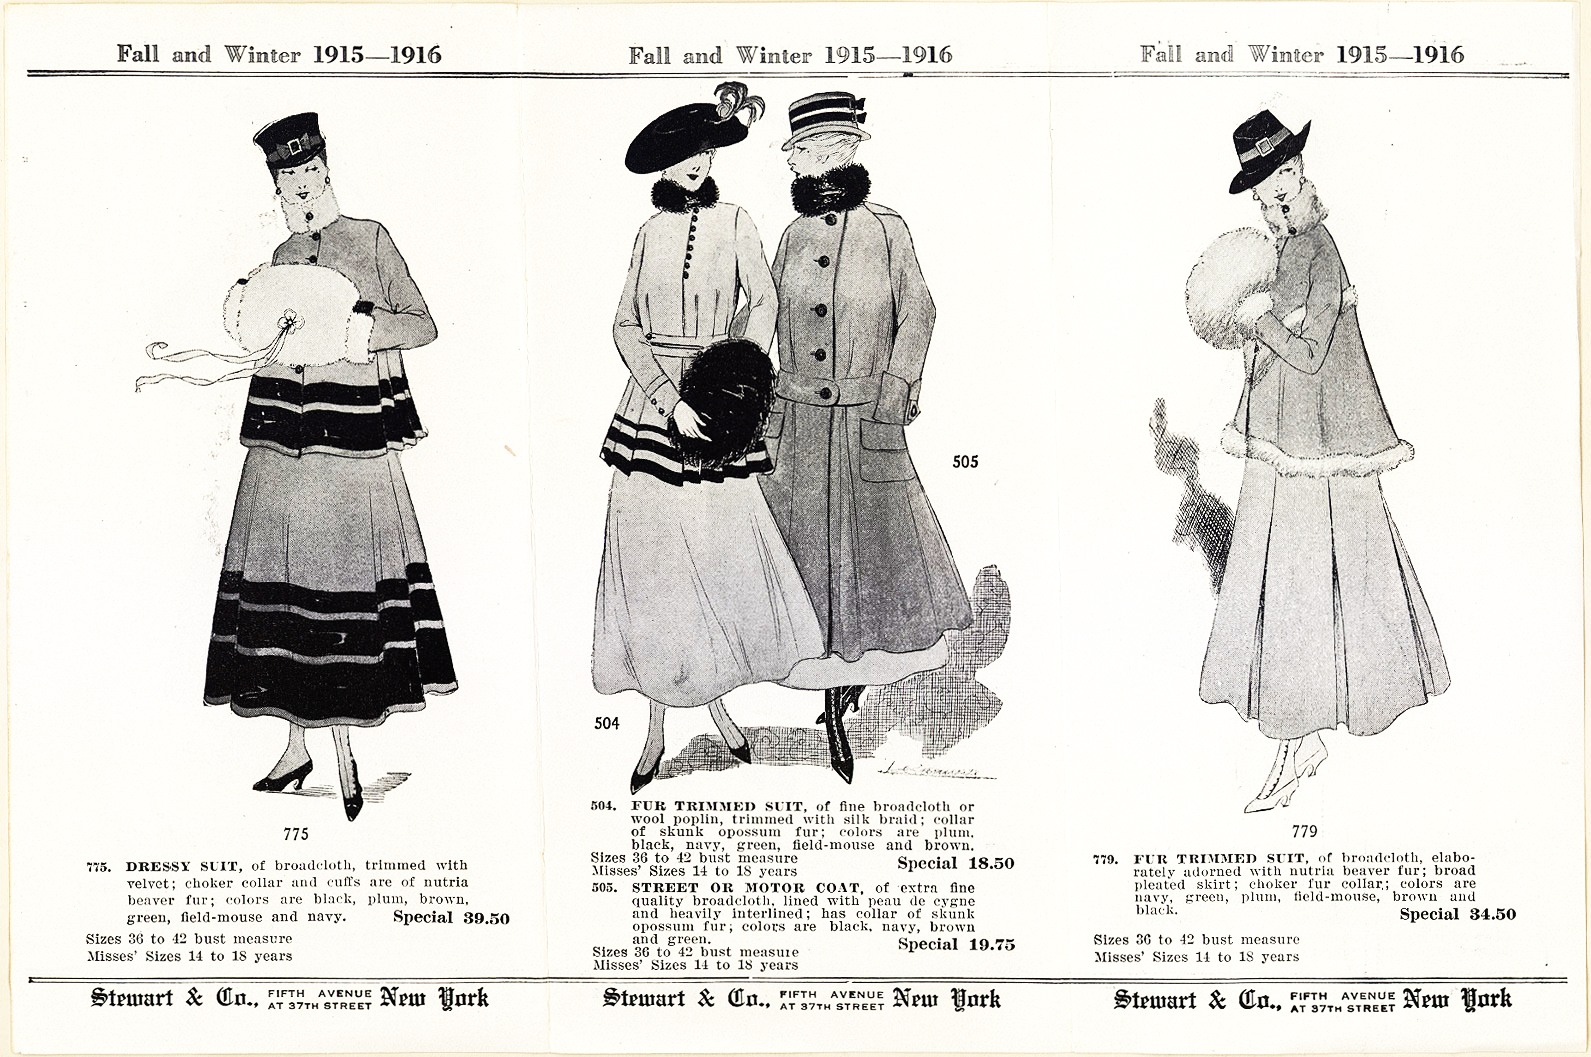 The Paper Collector: More Stewart & Co. Fashions, 1915-1916